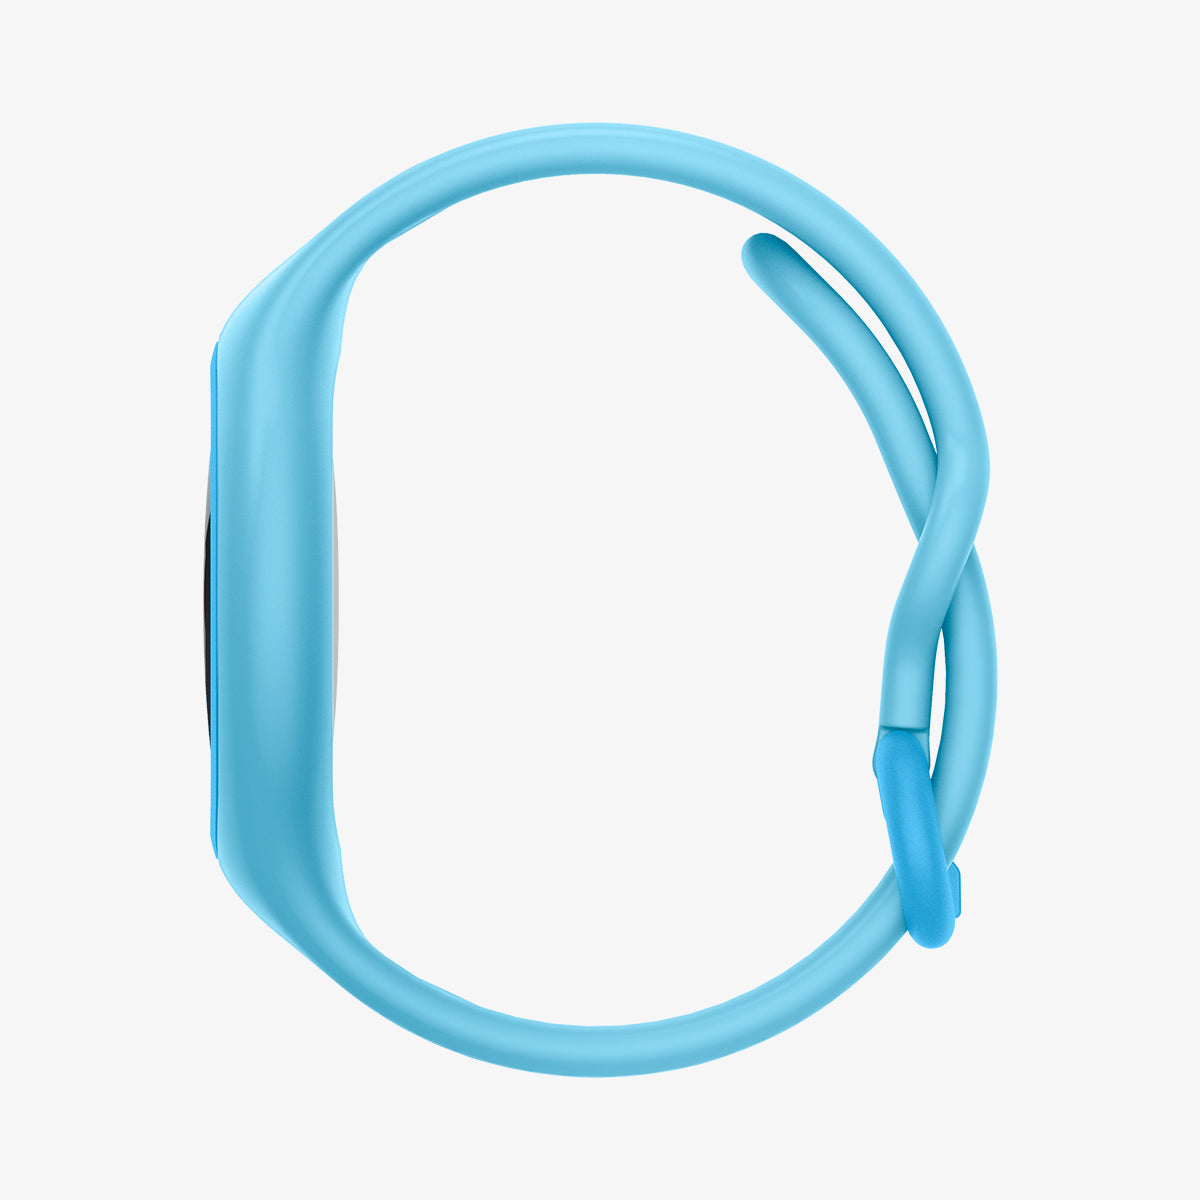 AHP03027 - AirTag Wristband Play 360 in ocean blue showing the side